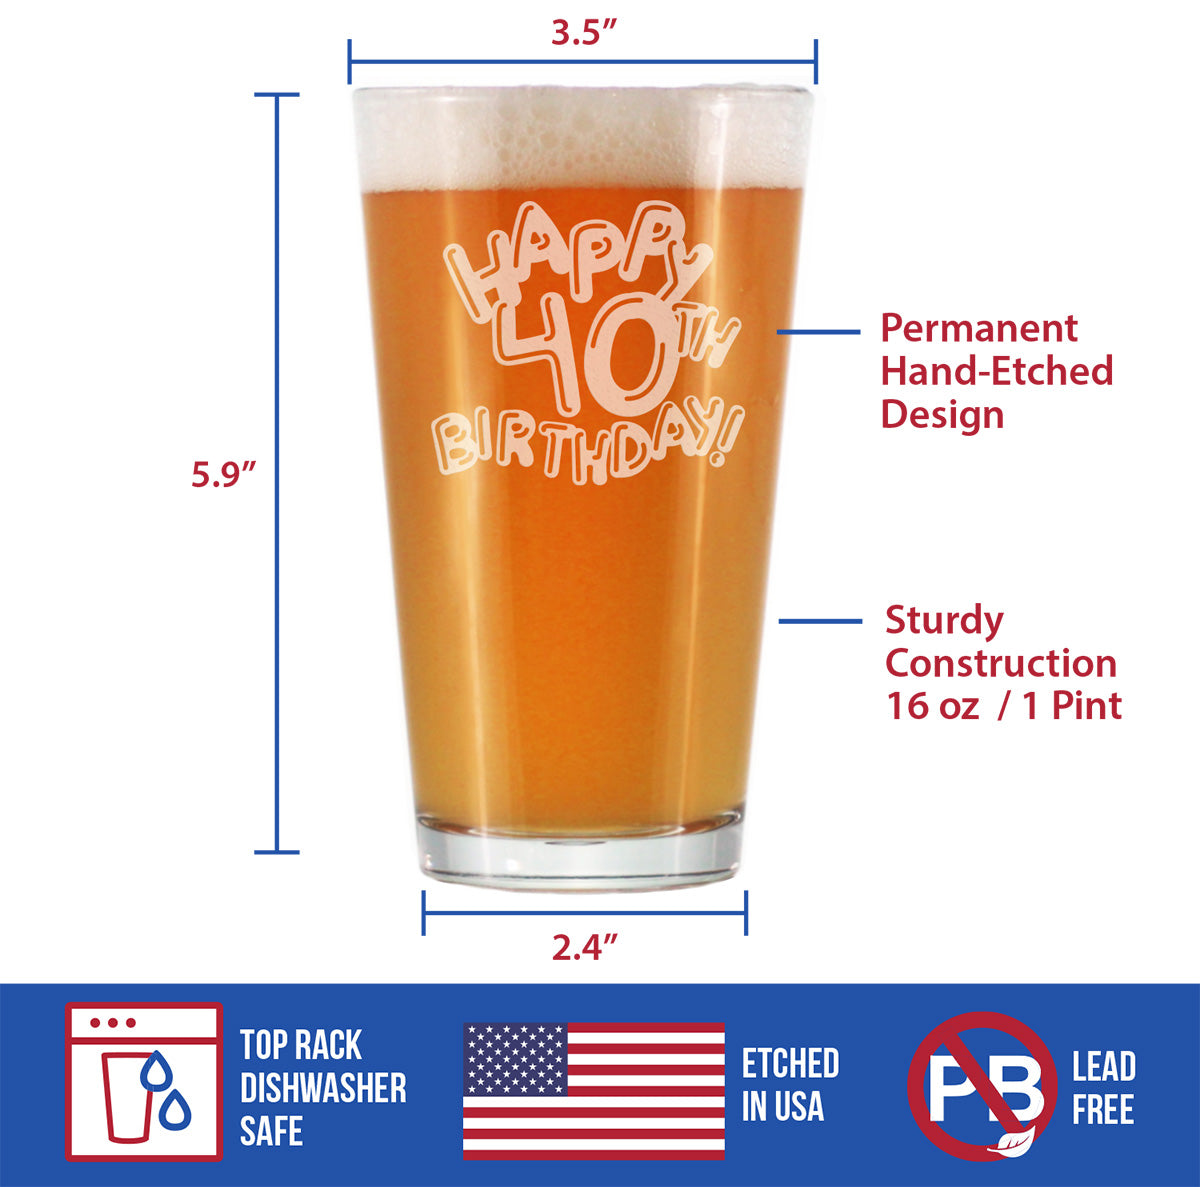 Happy 40th Birthday Balloons - Pint Glass for Beer - Gifts for Women &amp; Men Turning 40 - Fun Bday Party Decor - 16 Oz